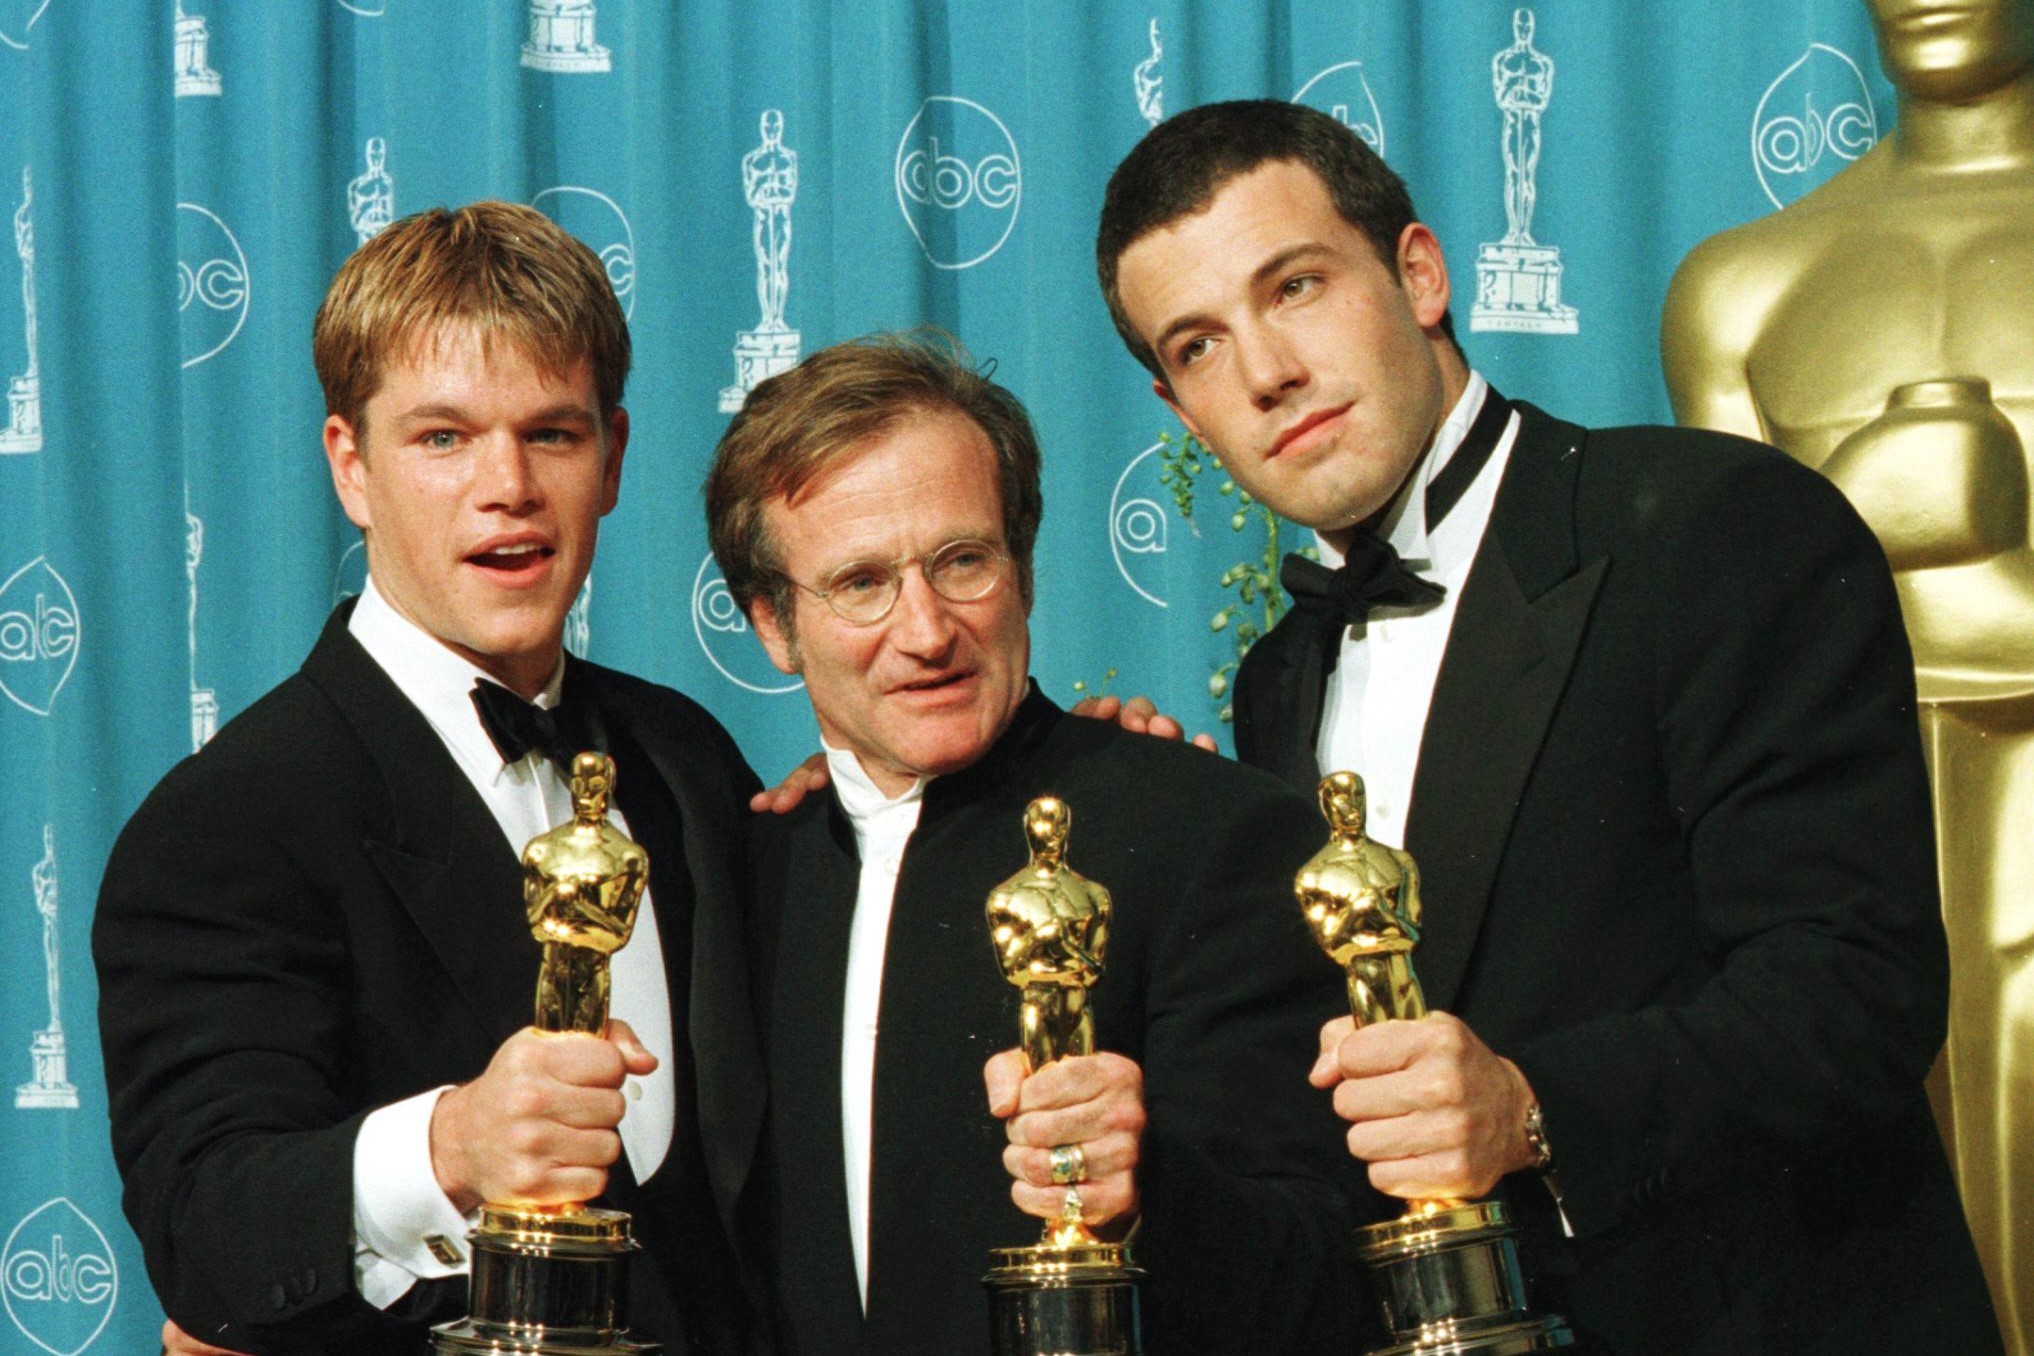 Matt Damon, Robin Williams and Ben Affleck celebrate their Oscar wins for the movie 'Good Will Hunting.' Damon and Affleck won the Academy Award for Best Original Screenplay and Williams won for Best Supporting Actor.